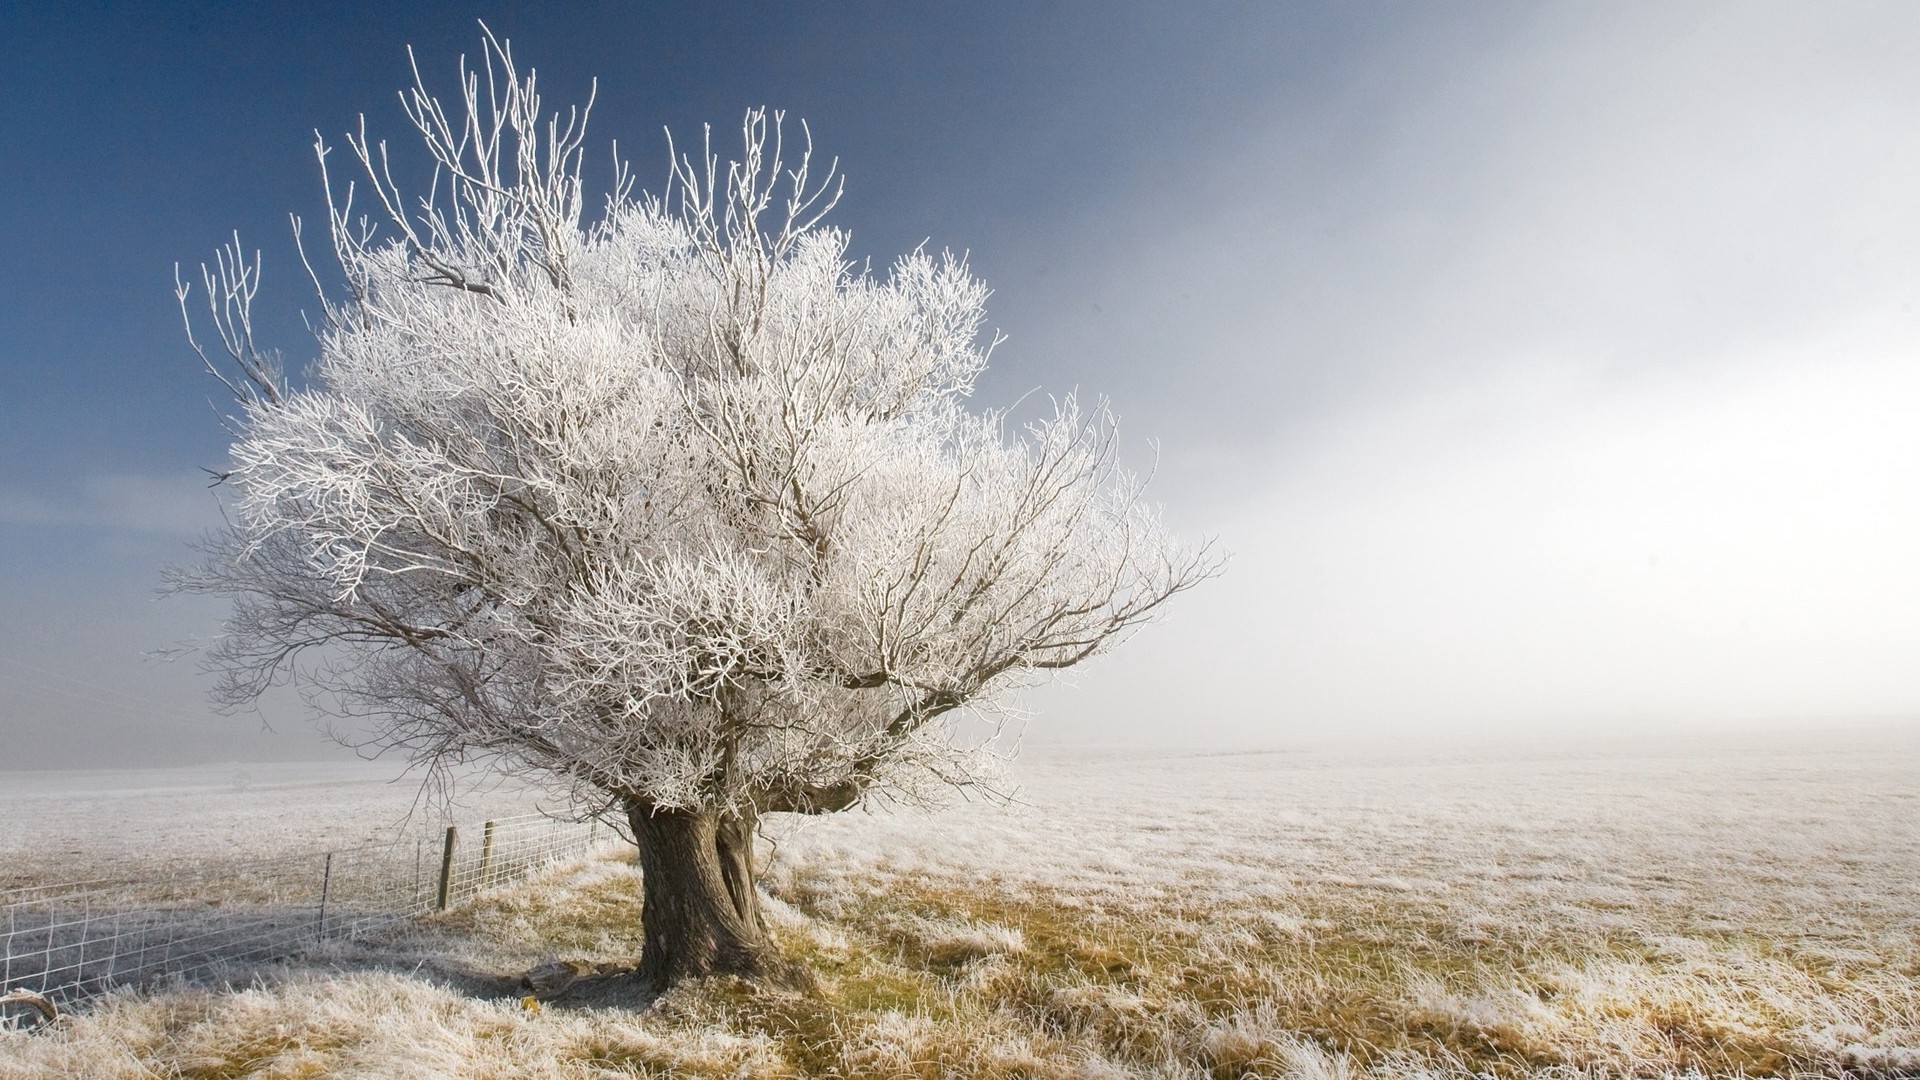 1920x1080 wallpapers: tree, branches, hoarfrost, gray hair, bare, sleep (image)